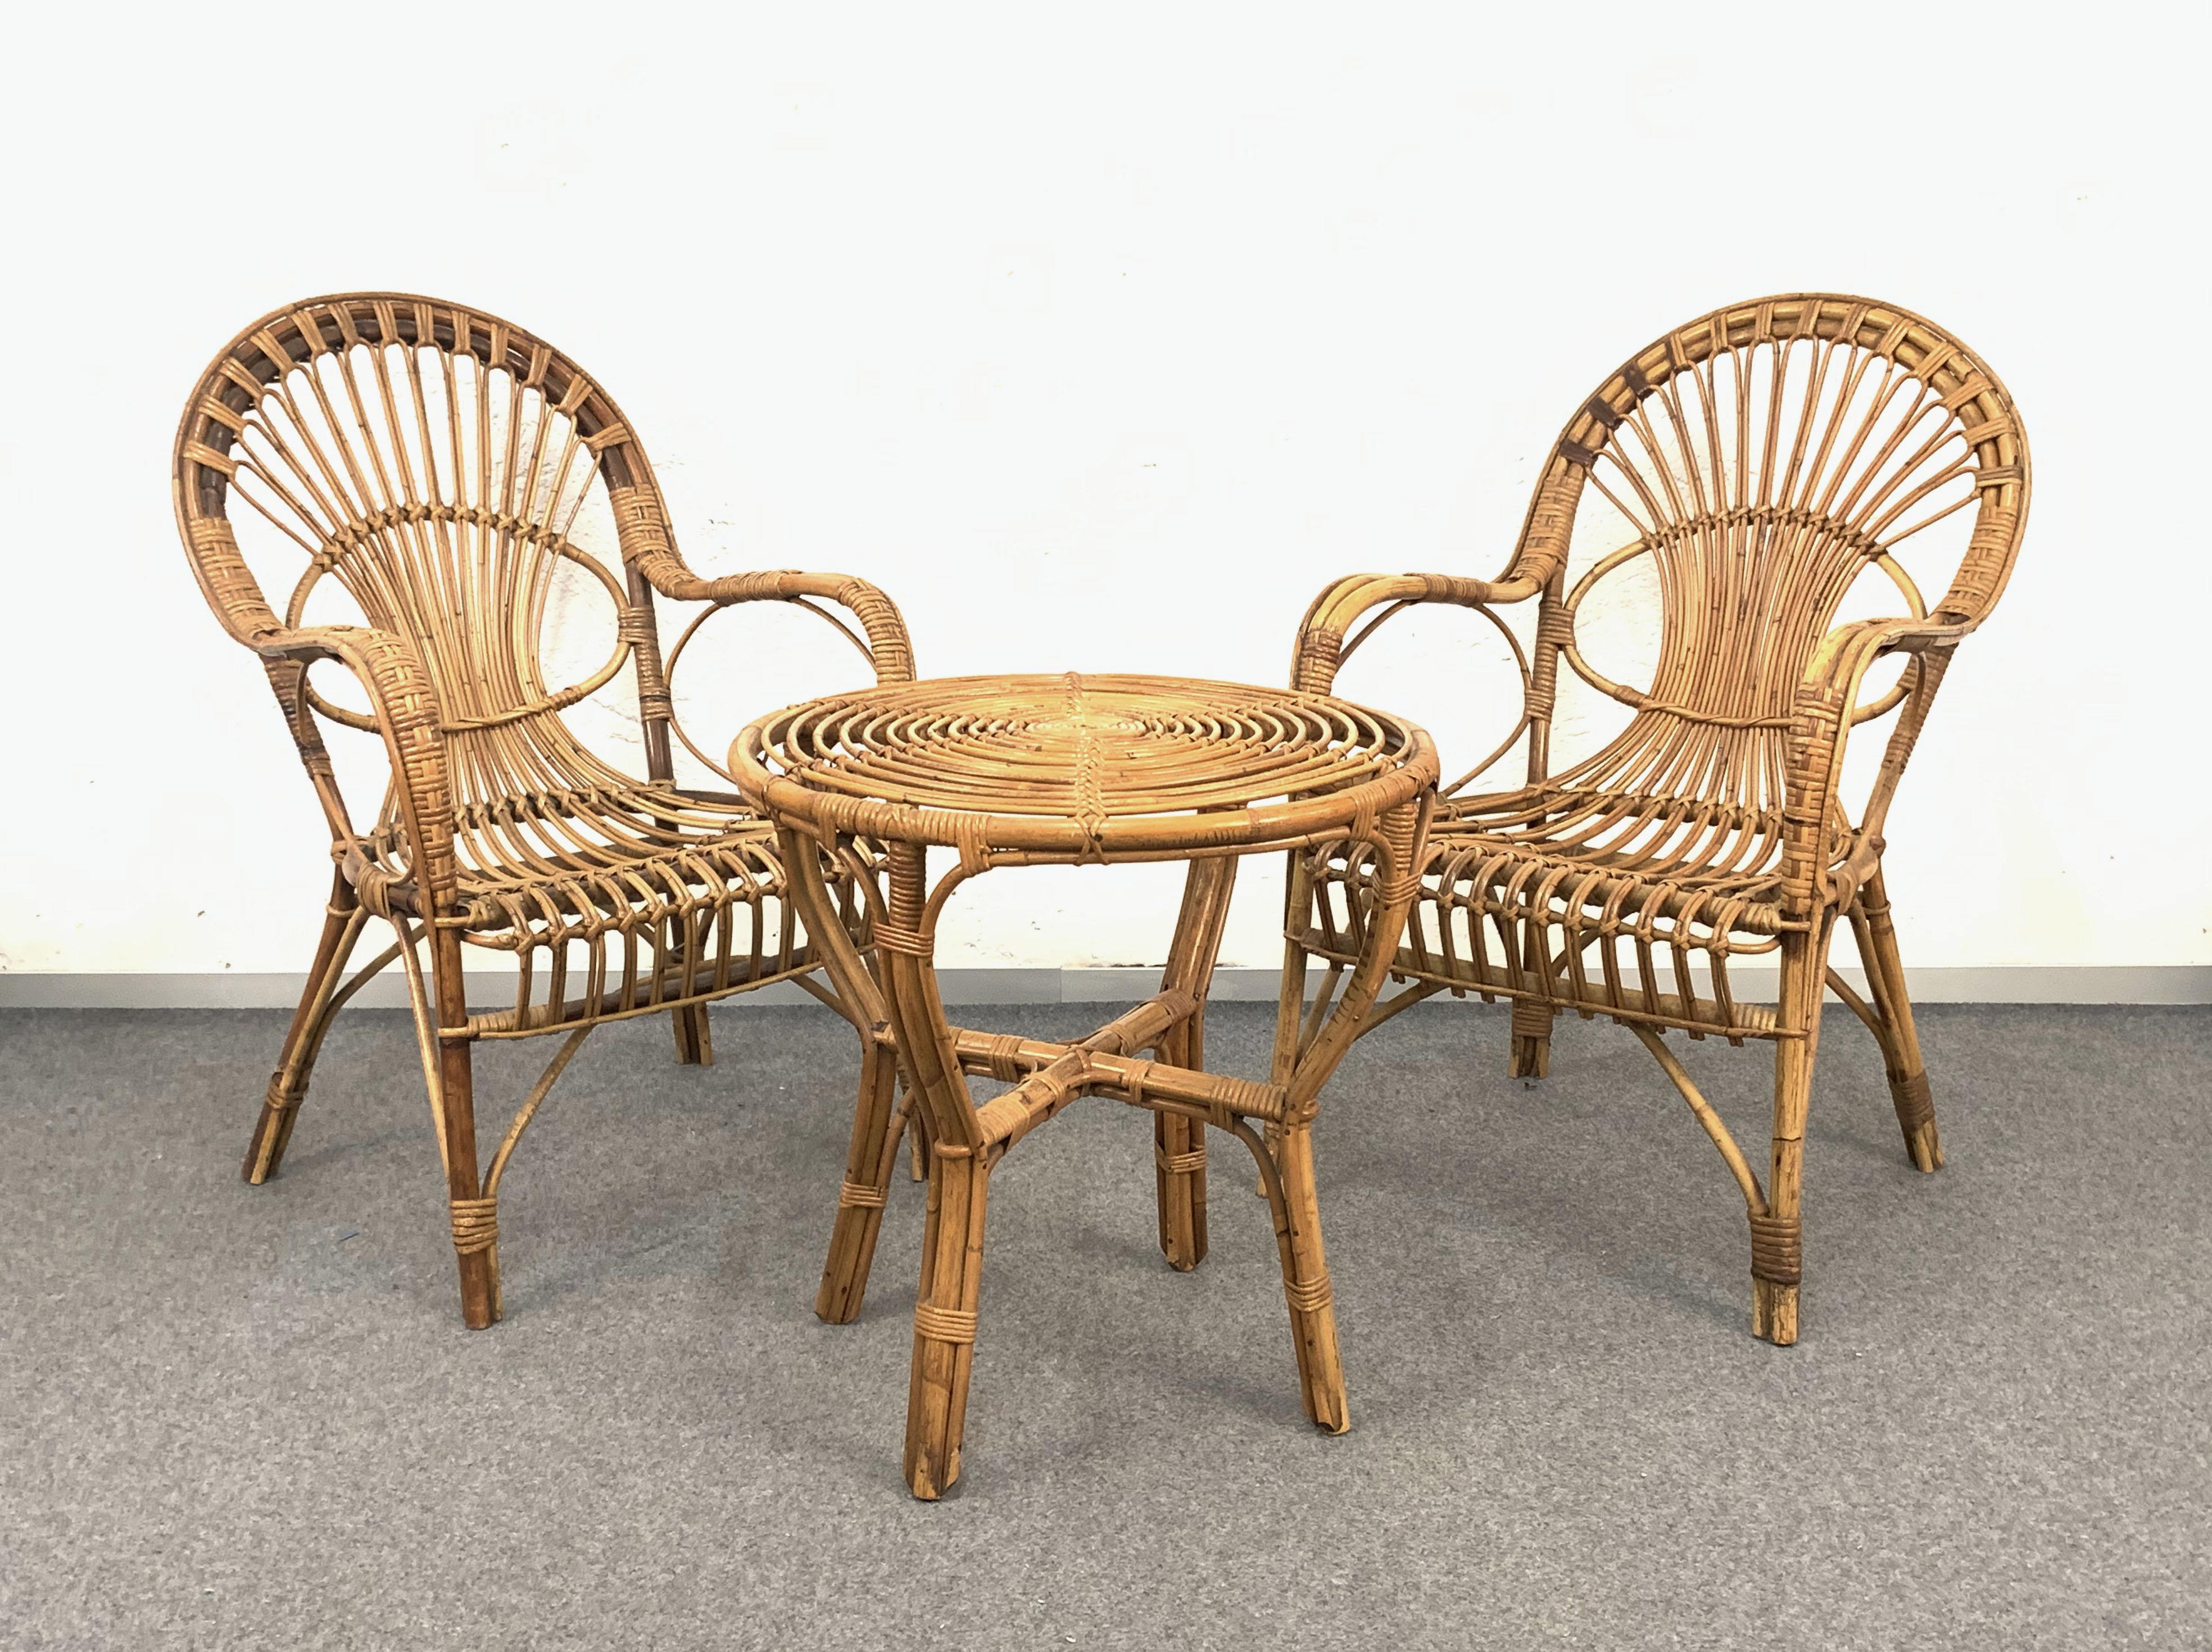 Midcentury Rattan and Bamboo Sofa, Armchairs and Italian Coffee Table, 1960s For Sale 5